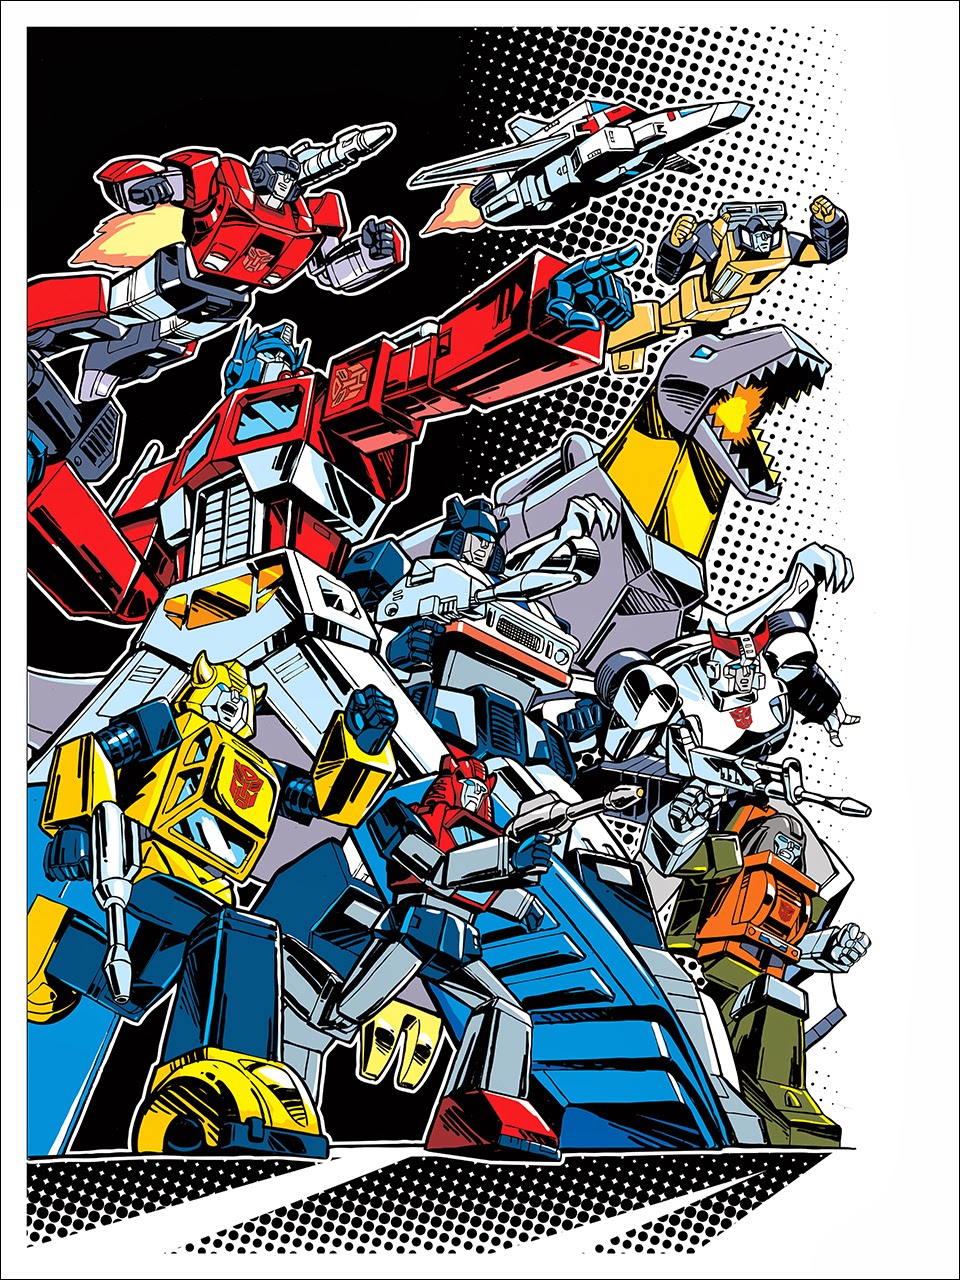 “Autobots” Transformers 30th Anniversary Giclee Print by Guido Guidi